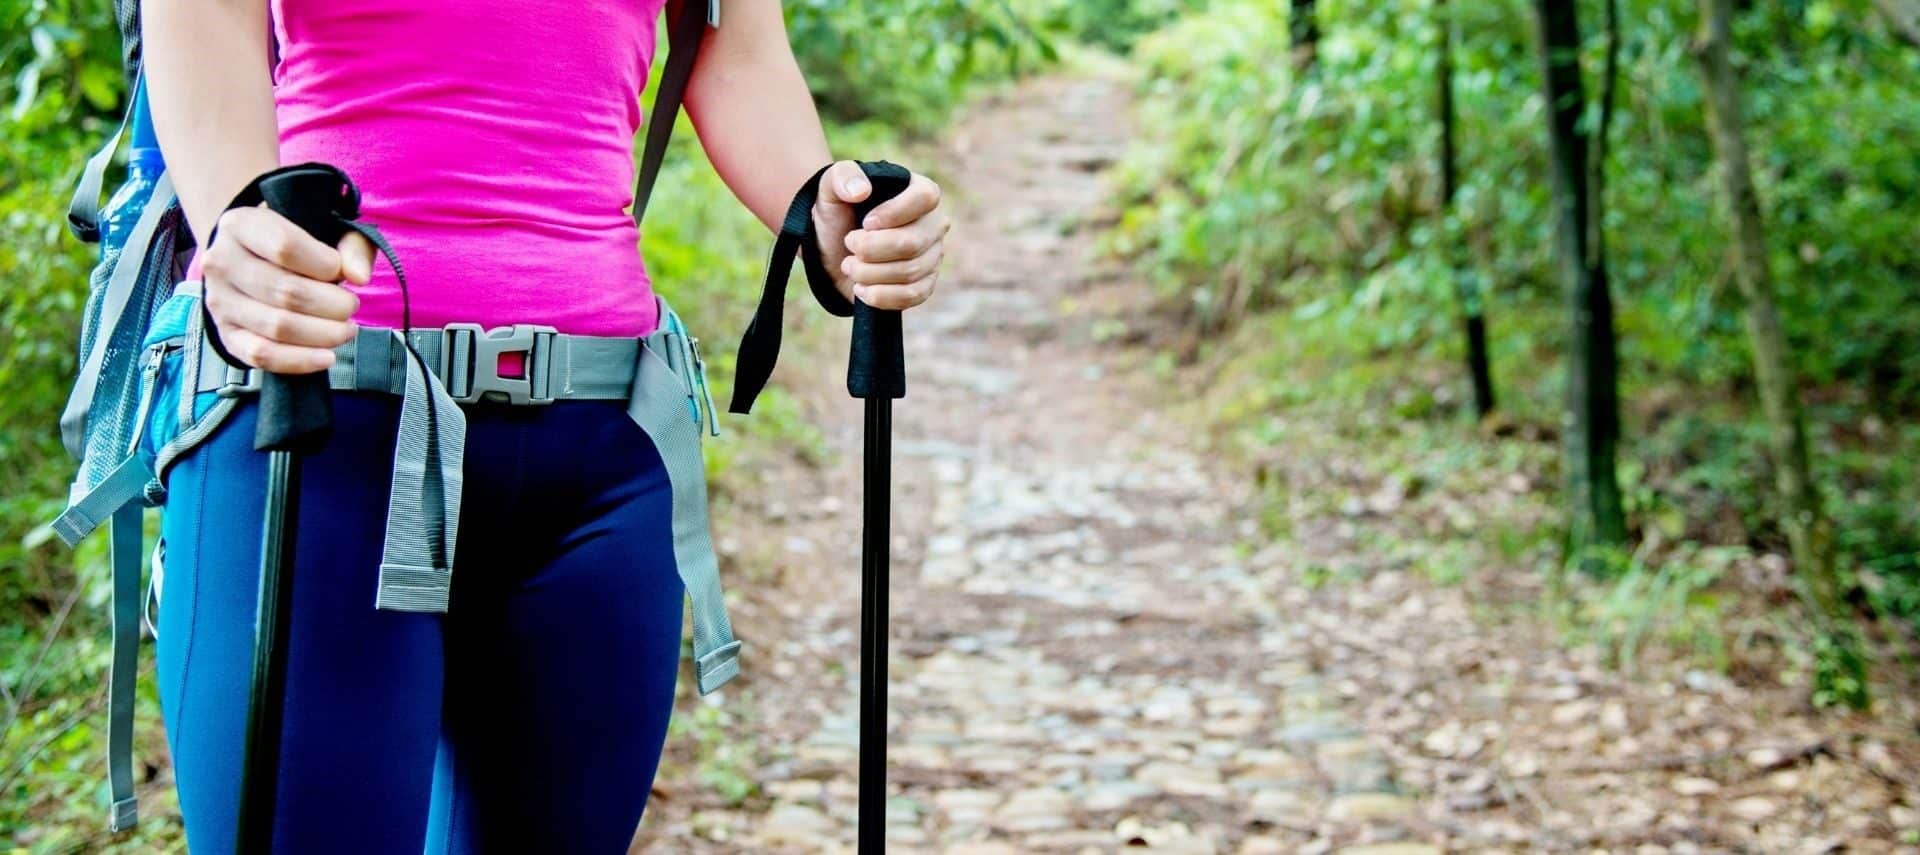 Woman hiking in a forest with a backpack and gripping hiking poles